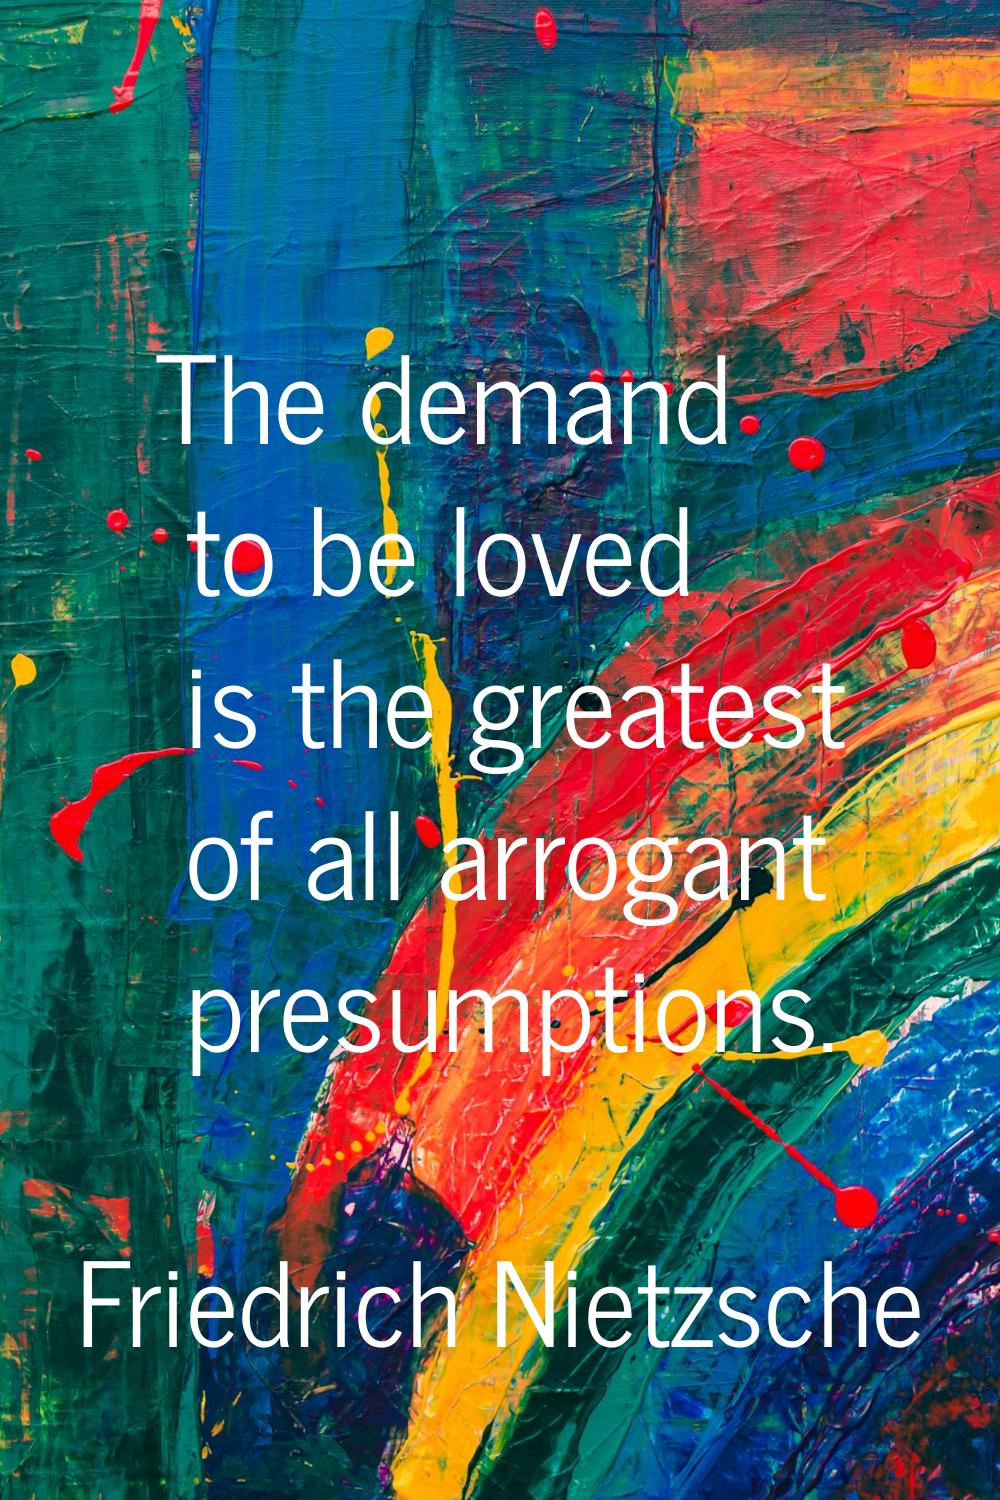 The demand to be loved is the greatest of all arrogant presumptions.